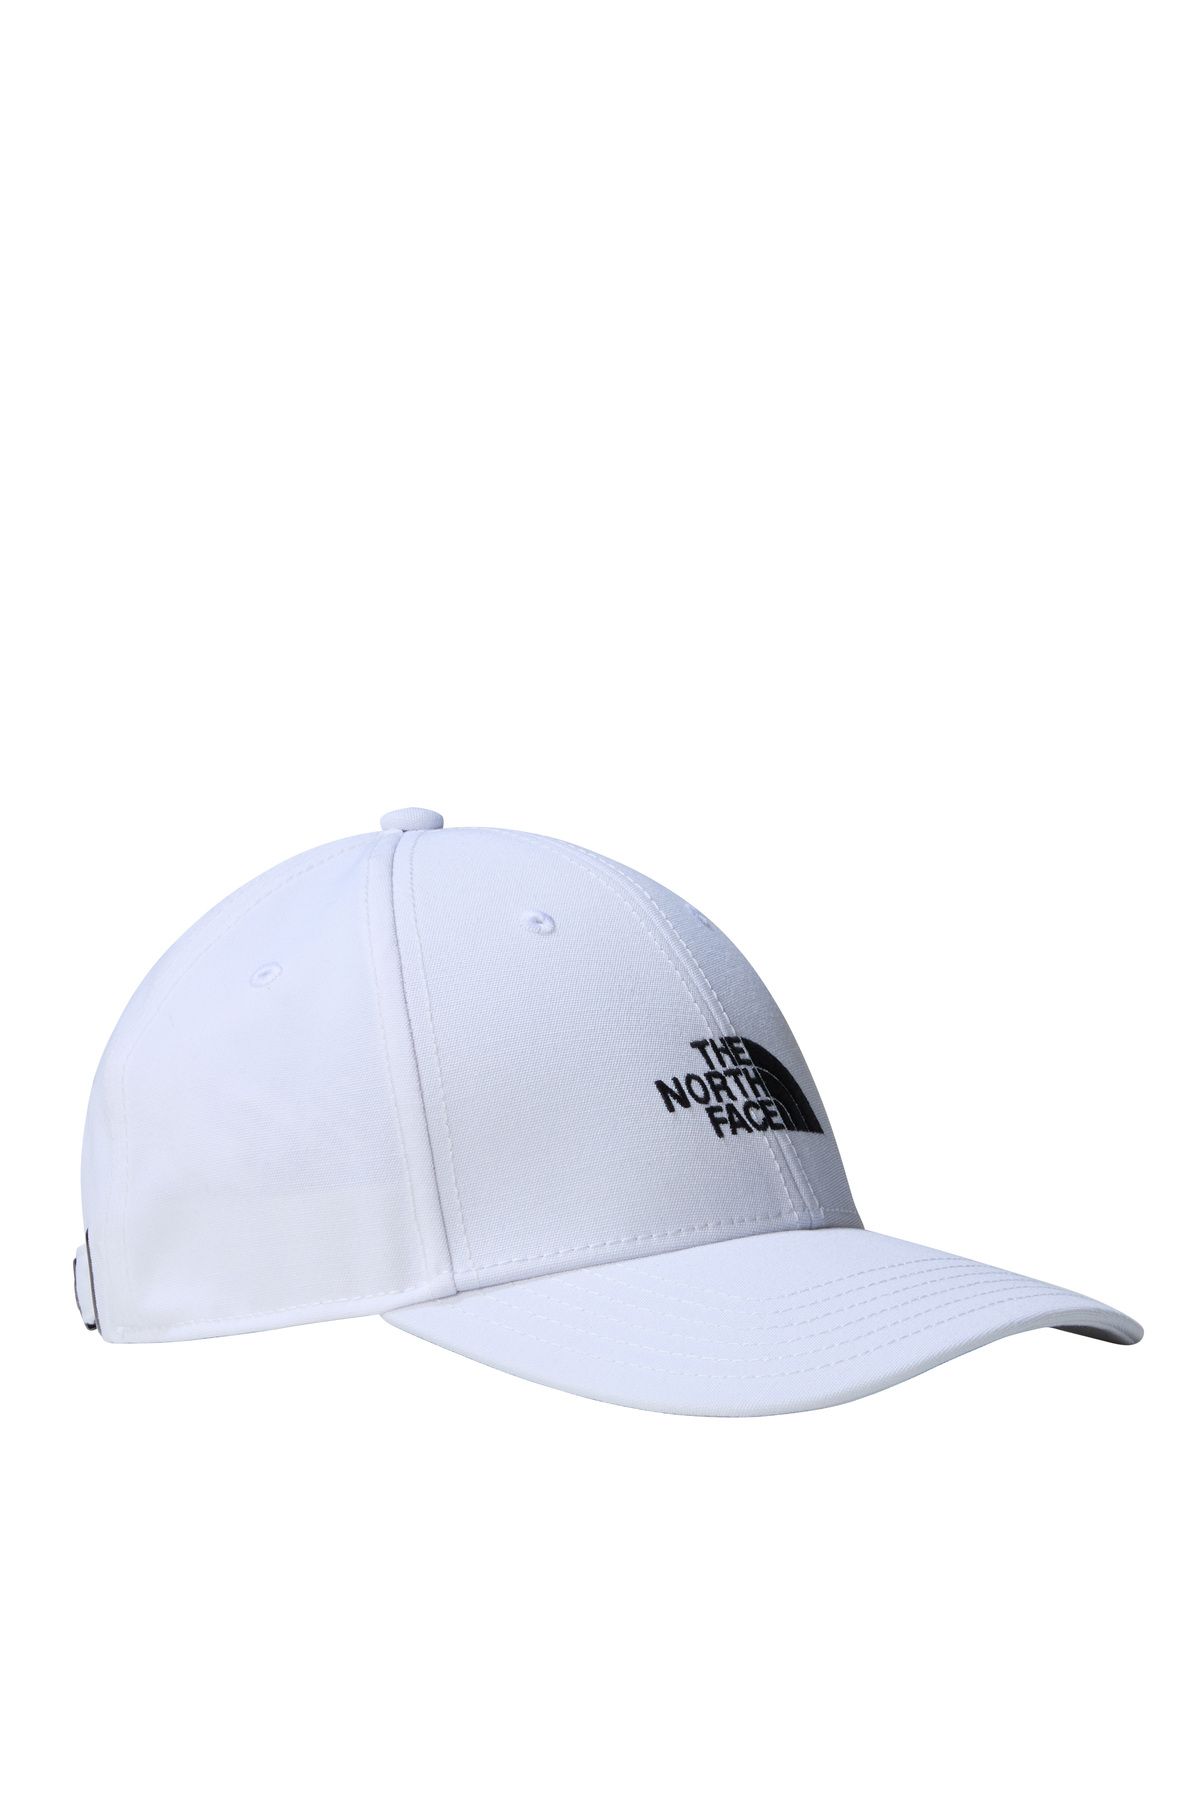 The North Face Recycled 66 Classıc Hat Unisex Beyaz Şapka Nf0a4vsvfn41